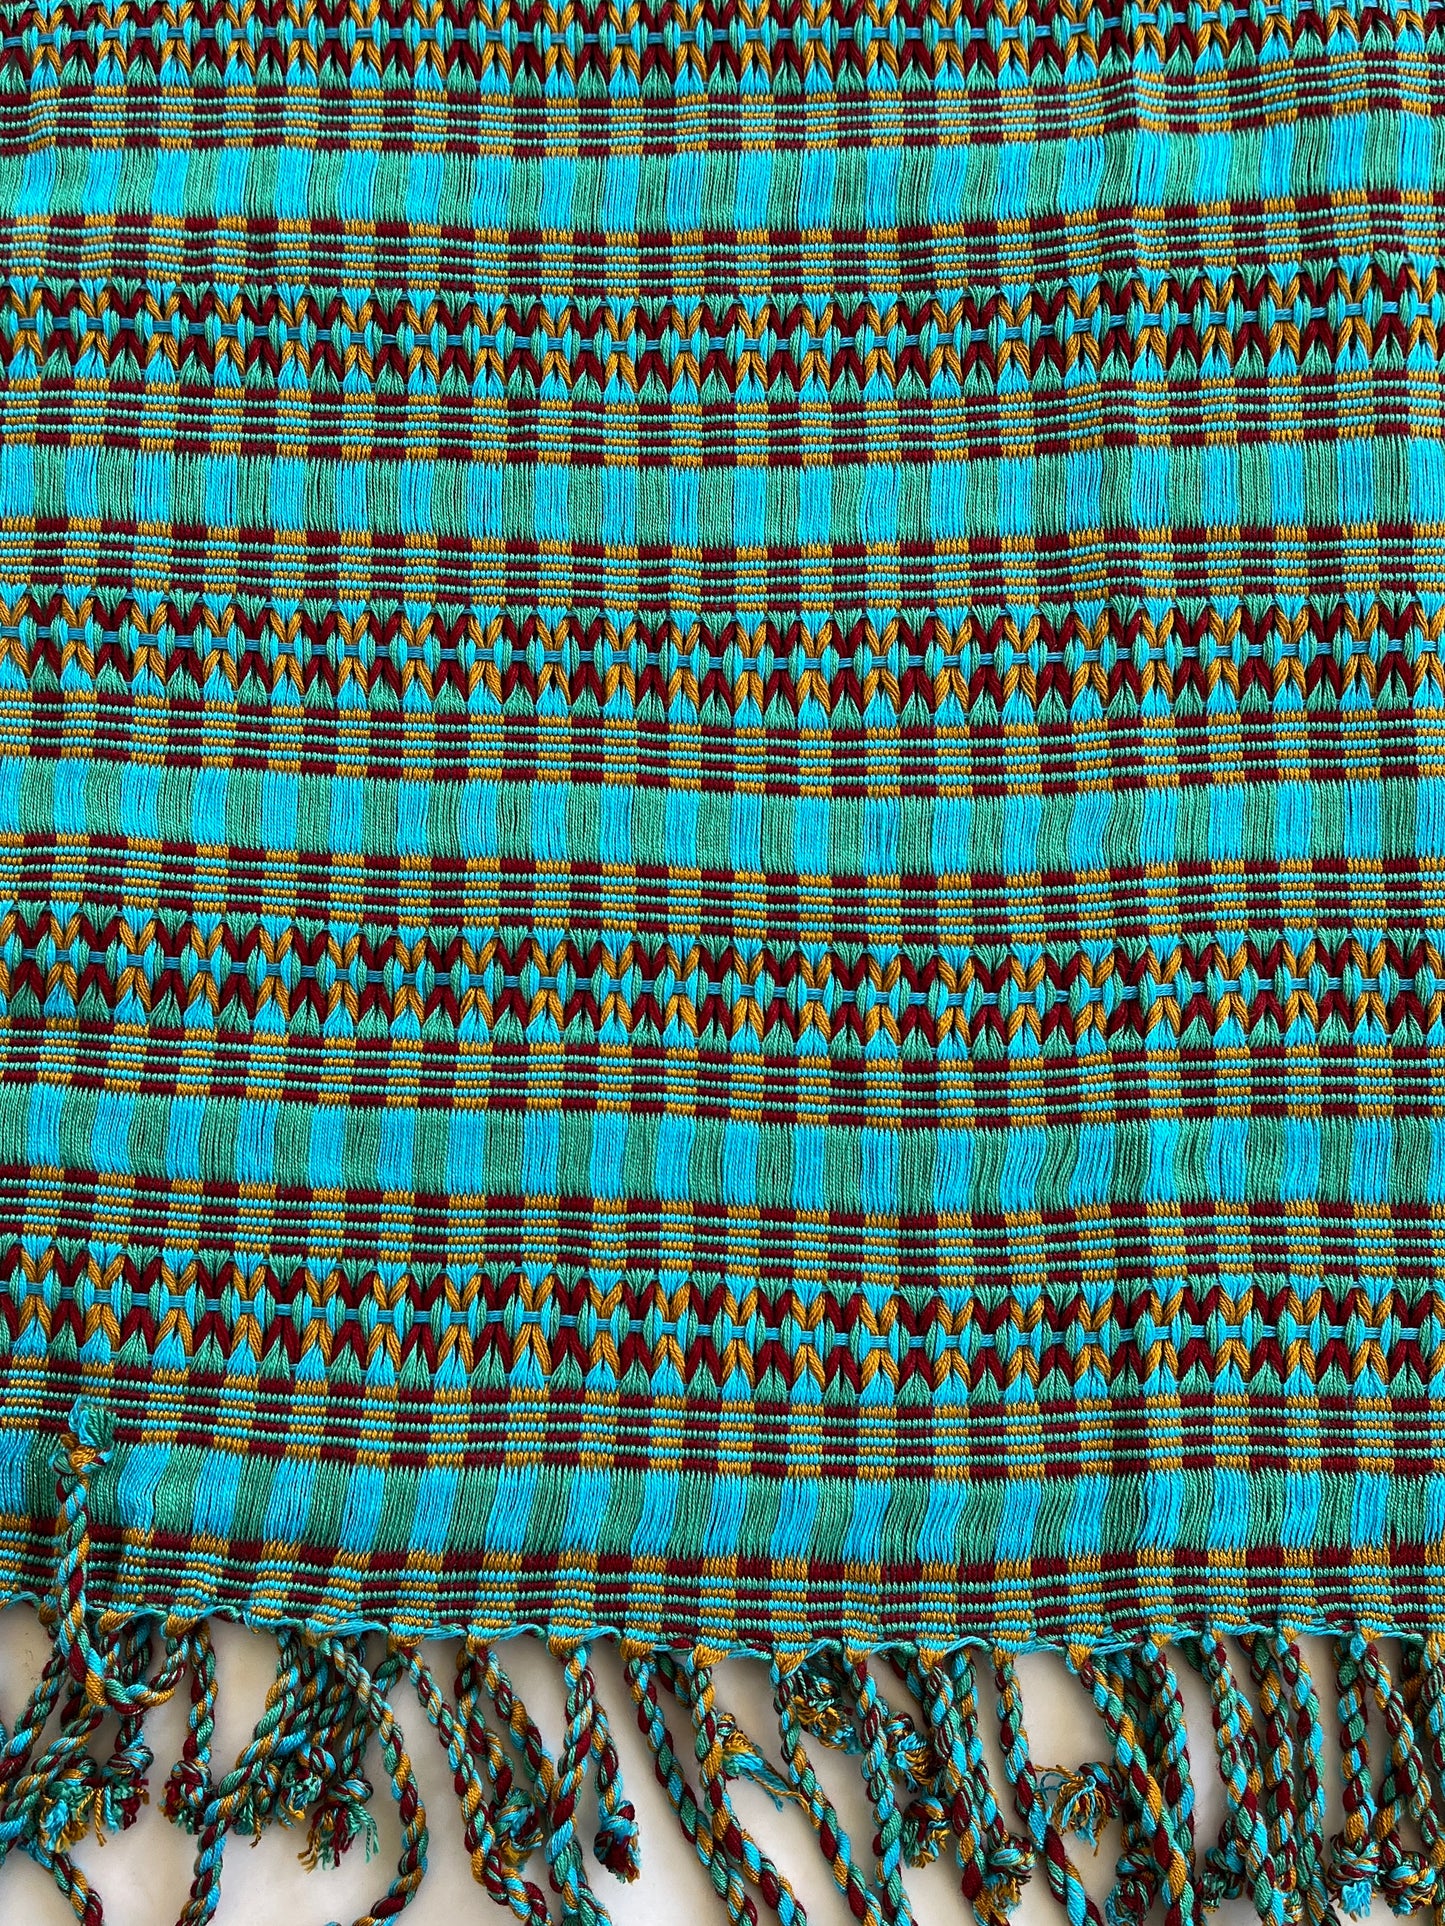 Turquoise and Copper Scarf/Throw